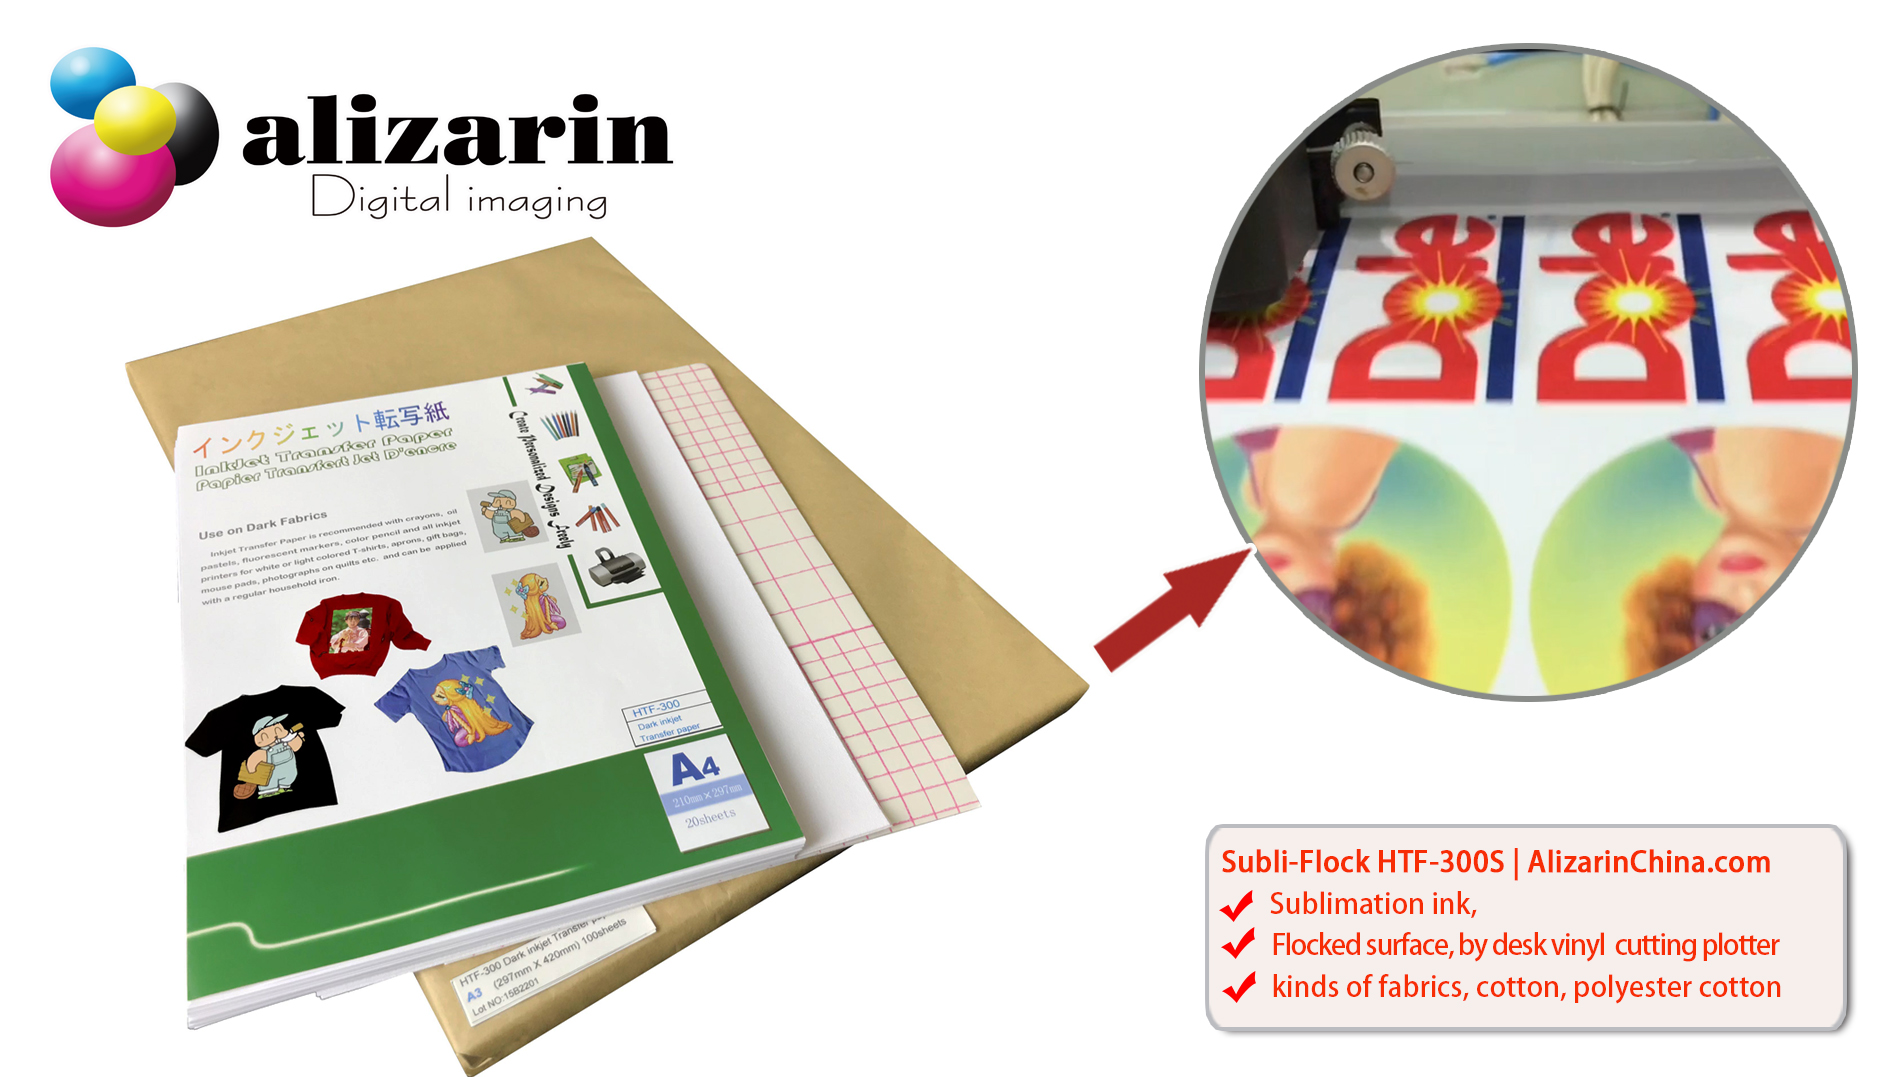 Sublimation-Flock HTF-300S printed by EPSON L805 with sublimation ink and cutting by desk cutter | AlizarinChina.com